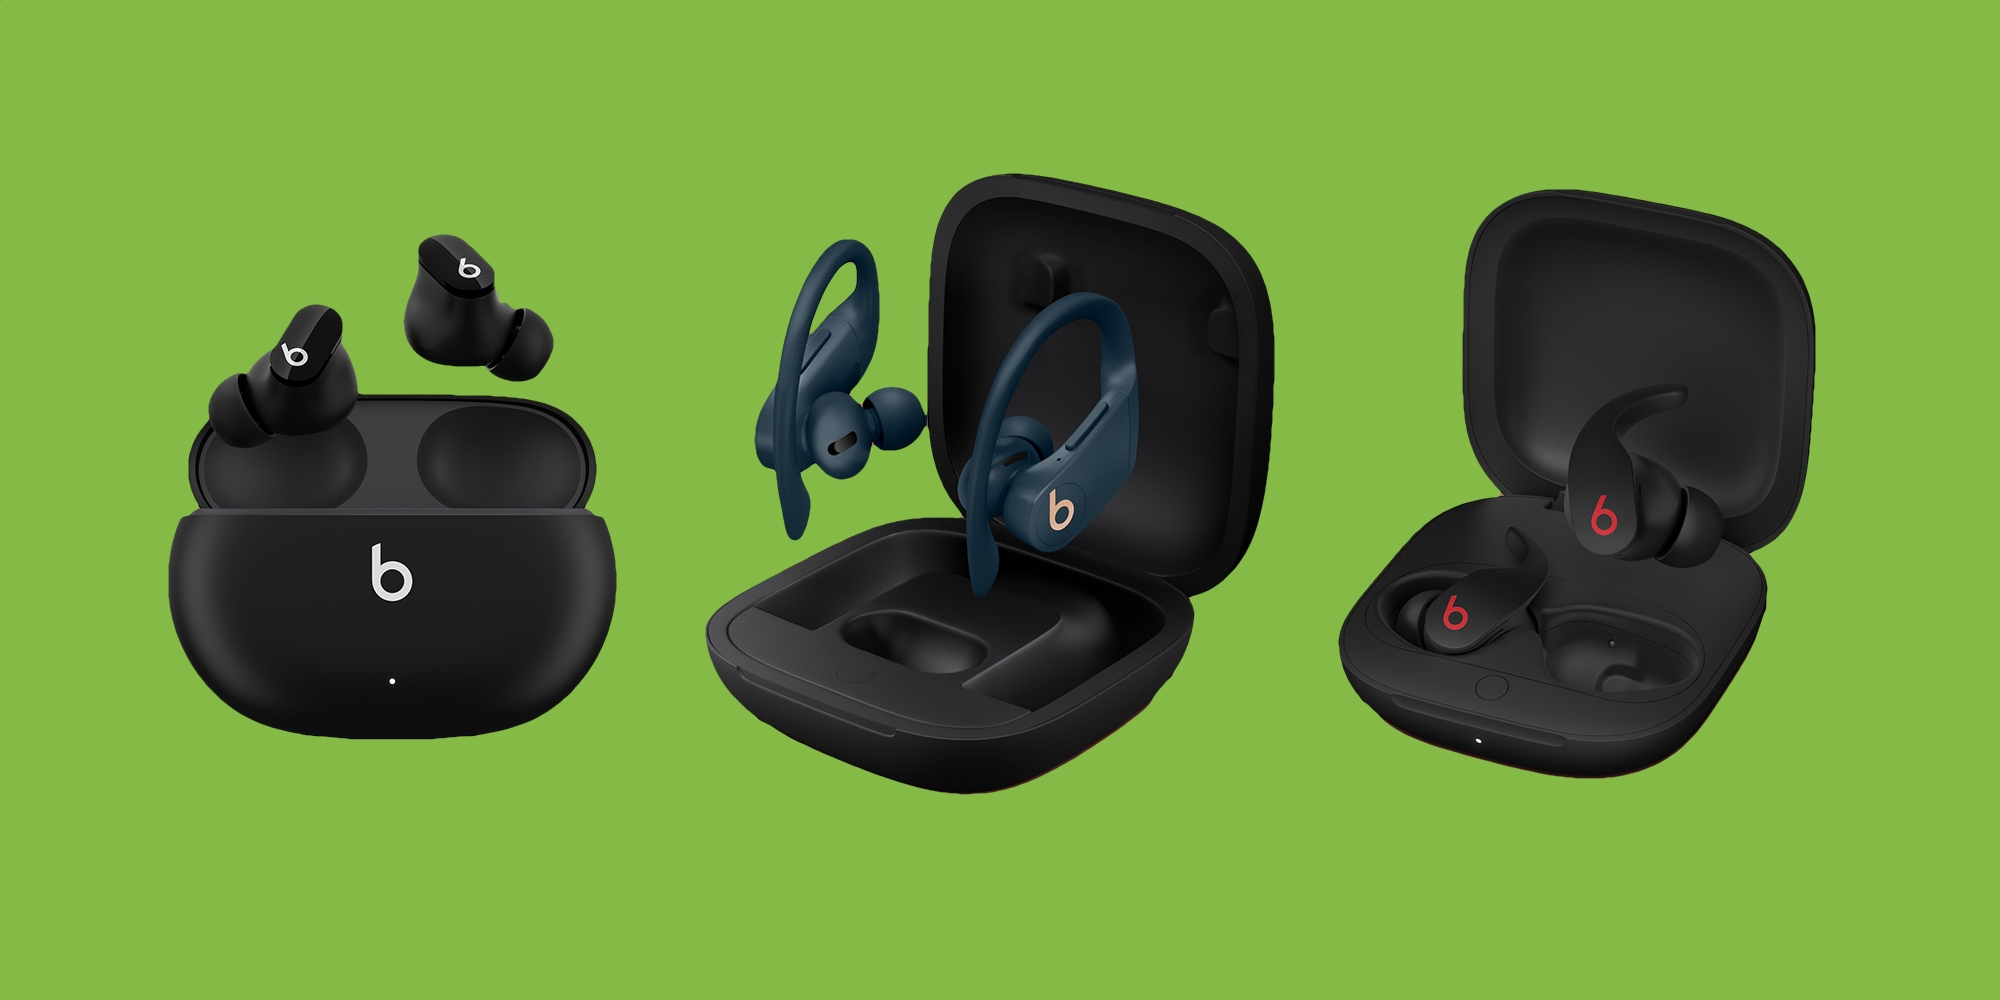 Beats Studio Buds, Beats Fit Pro and Powerbeats Pro are available now on Amazon for up to $90 off